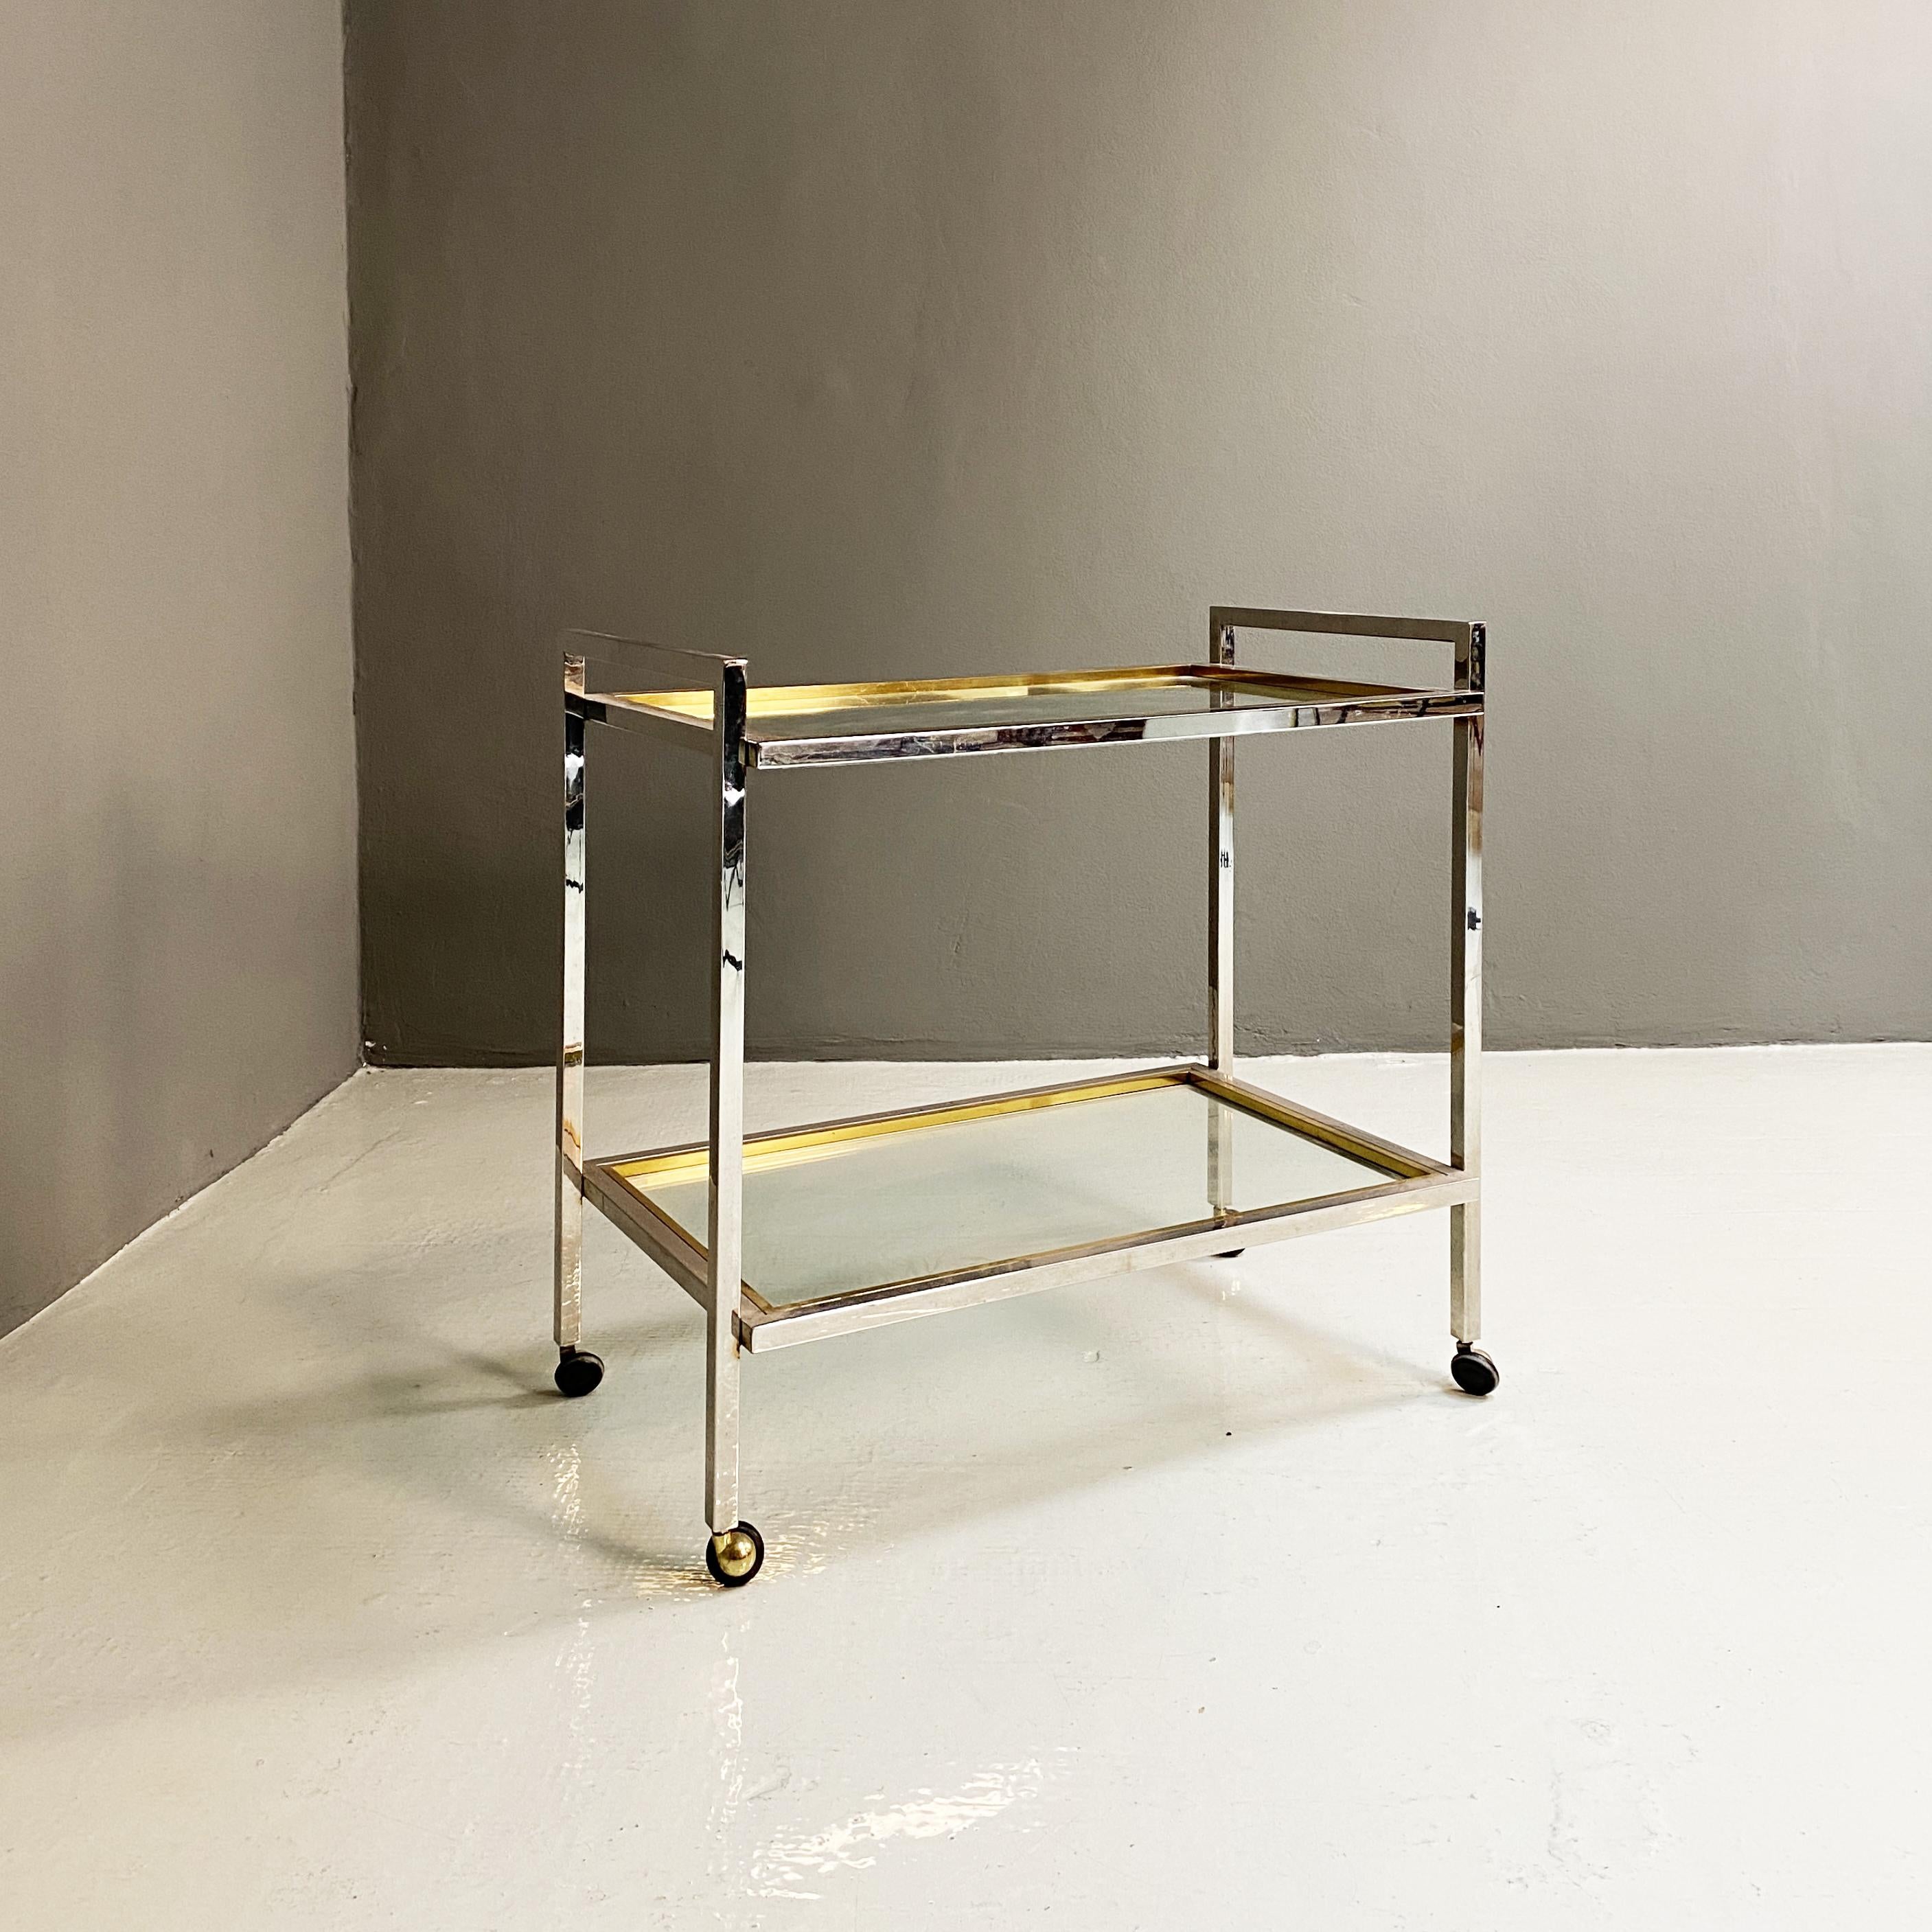 Italian Mid-Century Modern Steel and brass cart with two shelves, 1970s
Steel and brass cart on wheels with double glass shelf, with side handles.
1970s

Good conditions.

Measurements in cm 74x45x70H

 